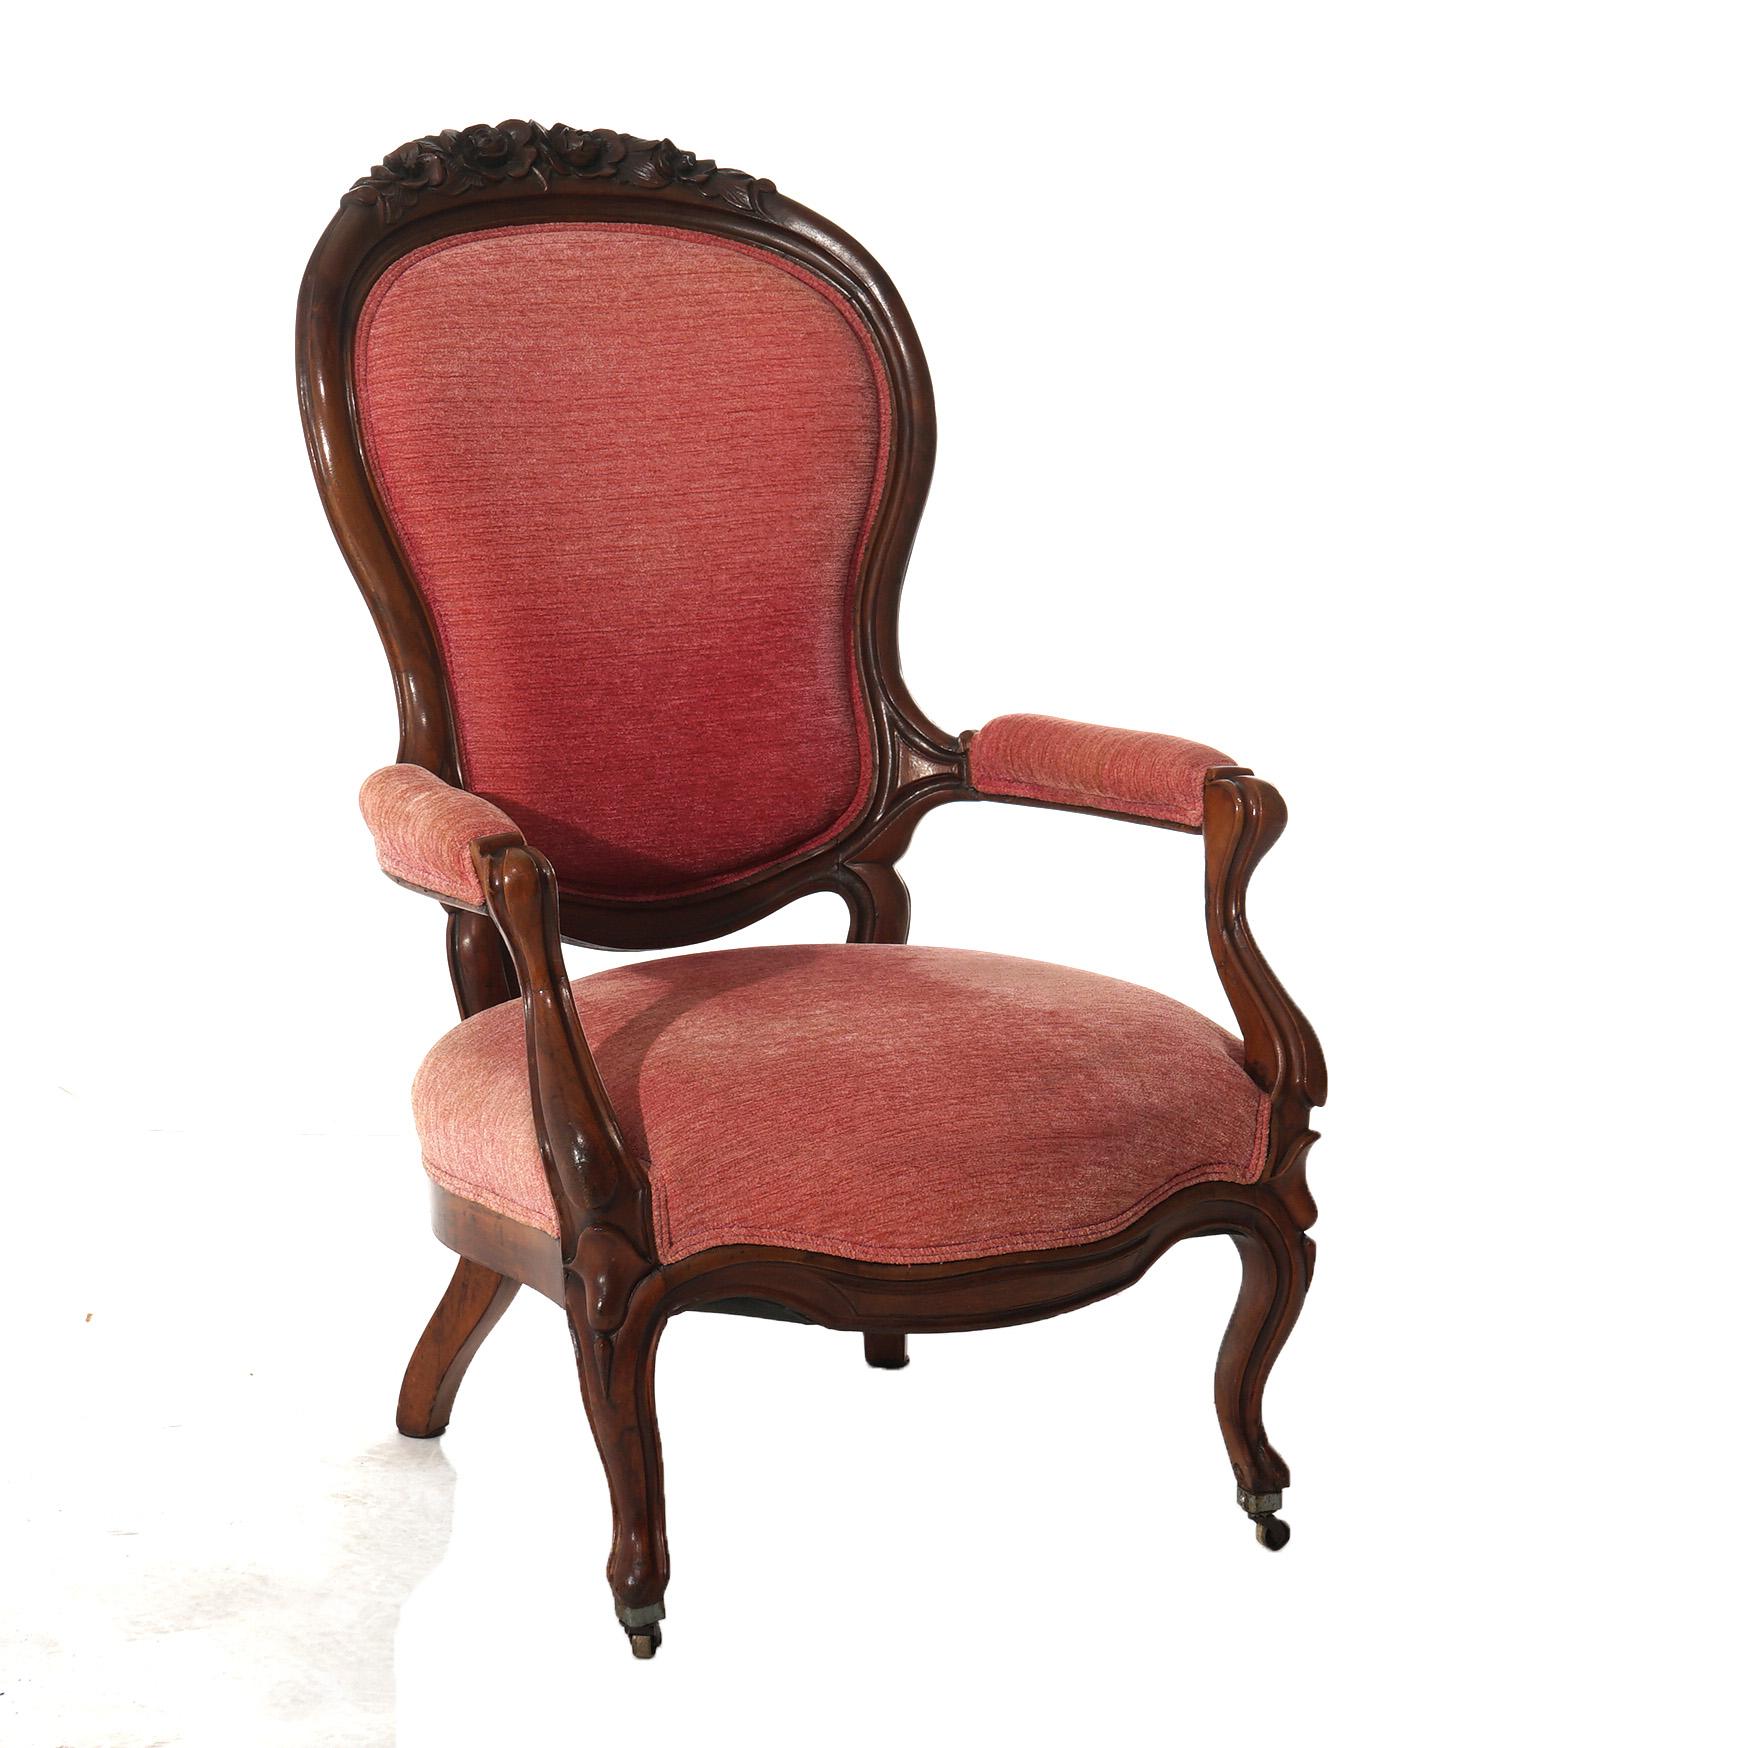 Victorian Antique Oversized Carved Walnut Armchair with Carved Floral Elements C1890 For Sale